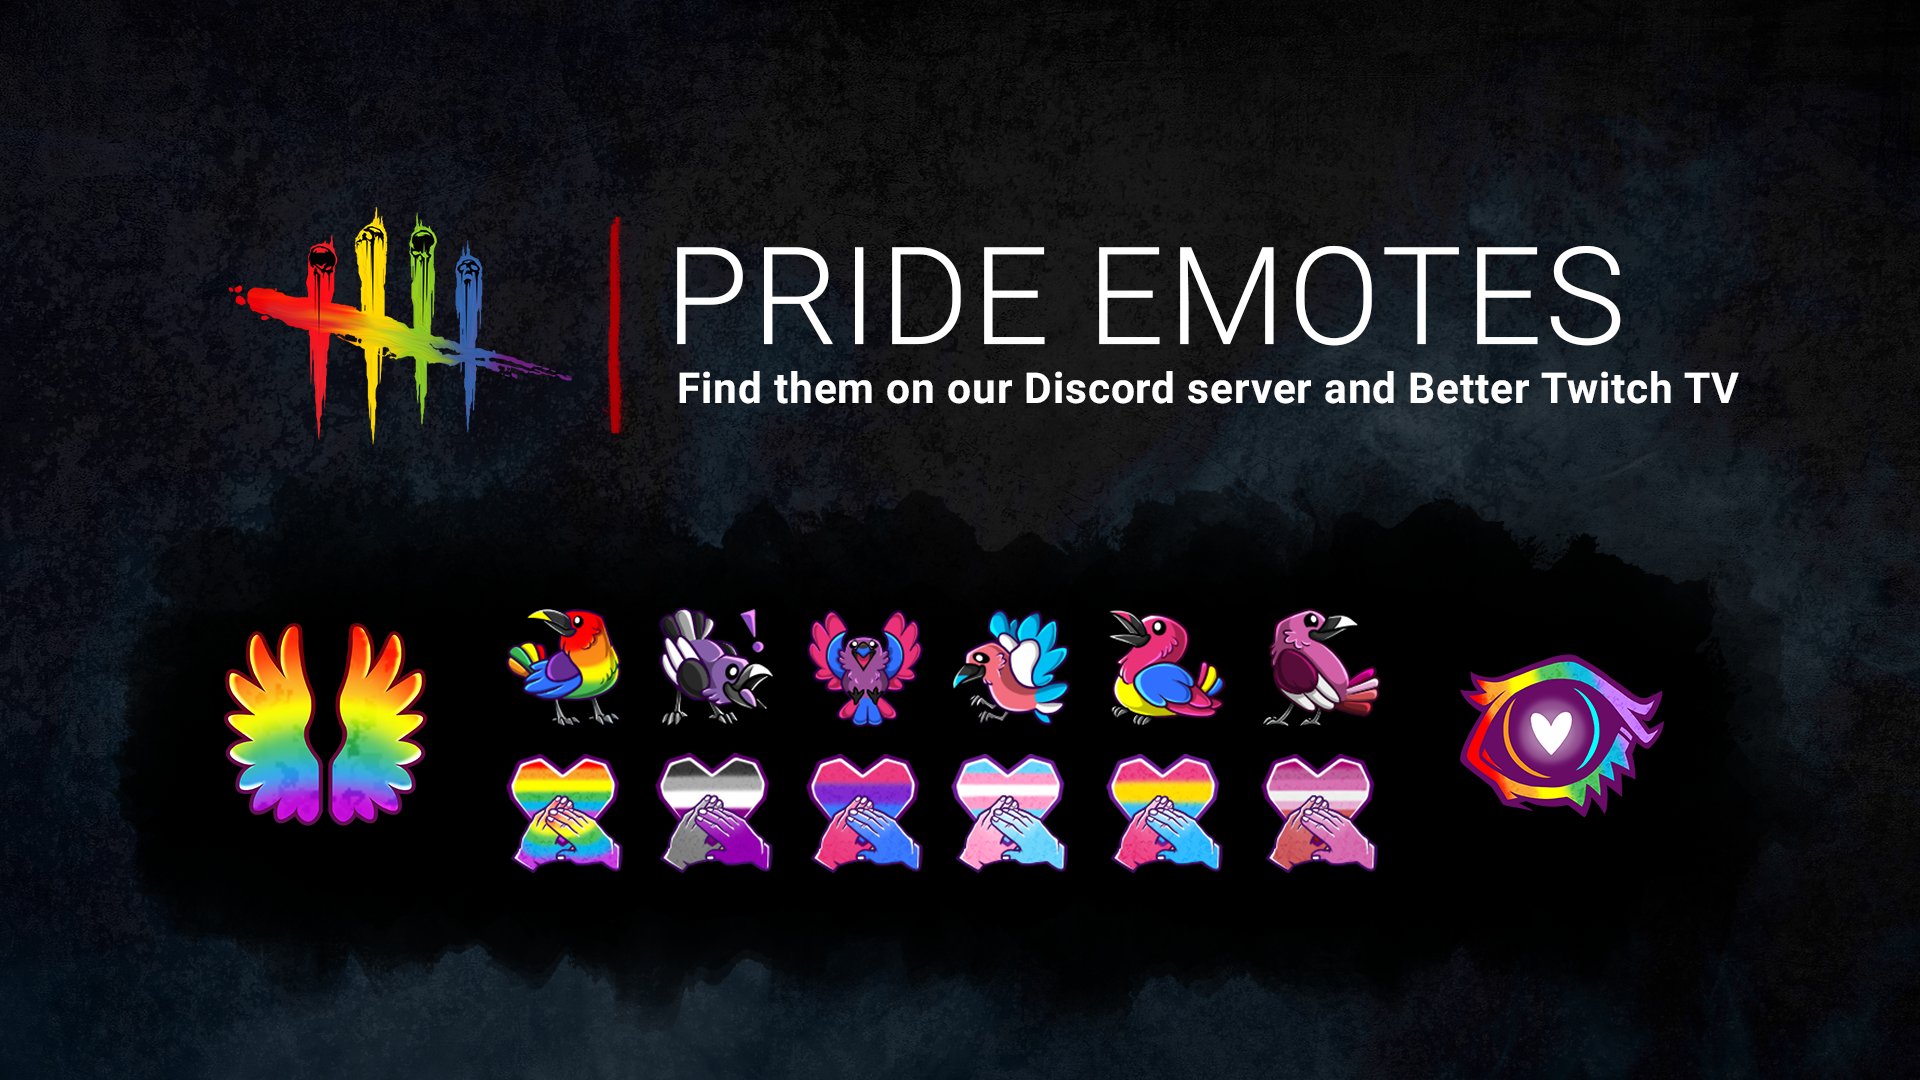 Dead By Daylight Mobile Be Seen Through The Fog These Pride Emotes Are Available On The Dbdmobile Discord Server Too Twitter